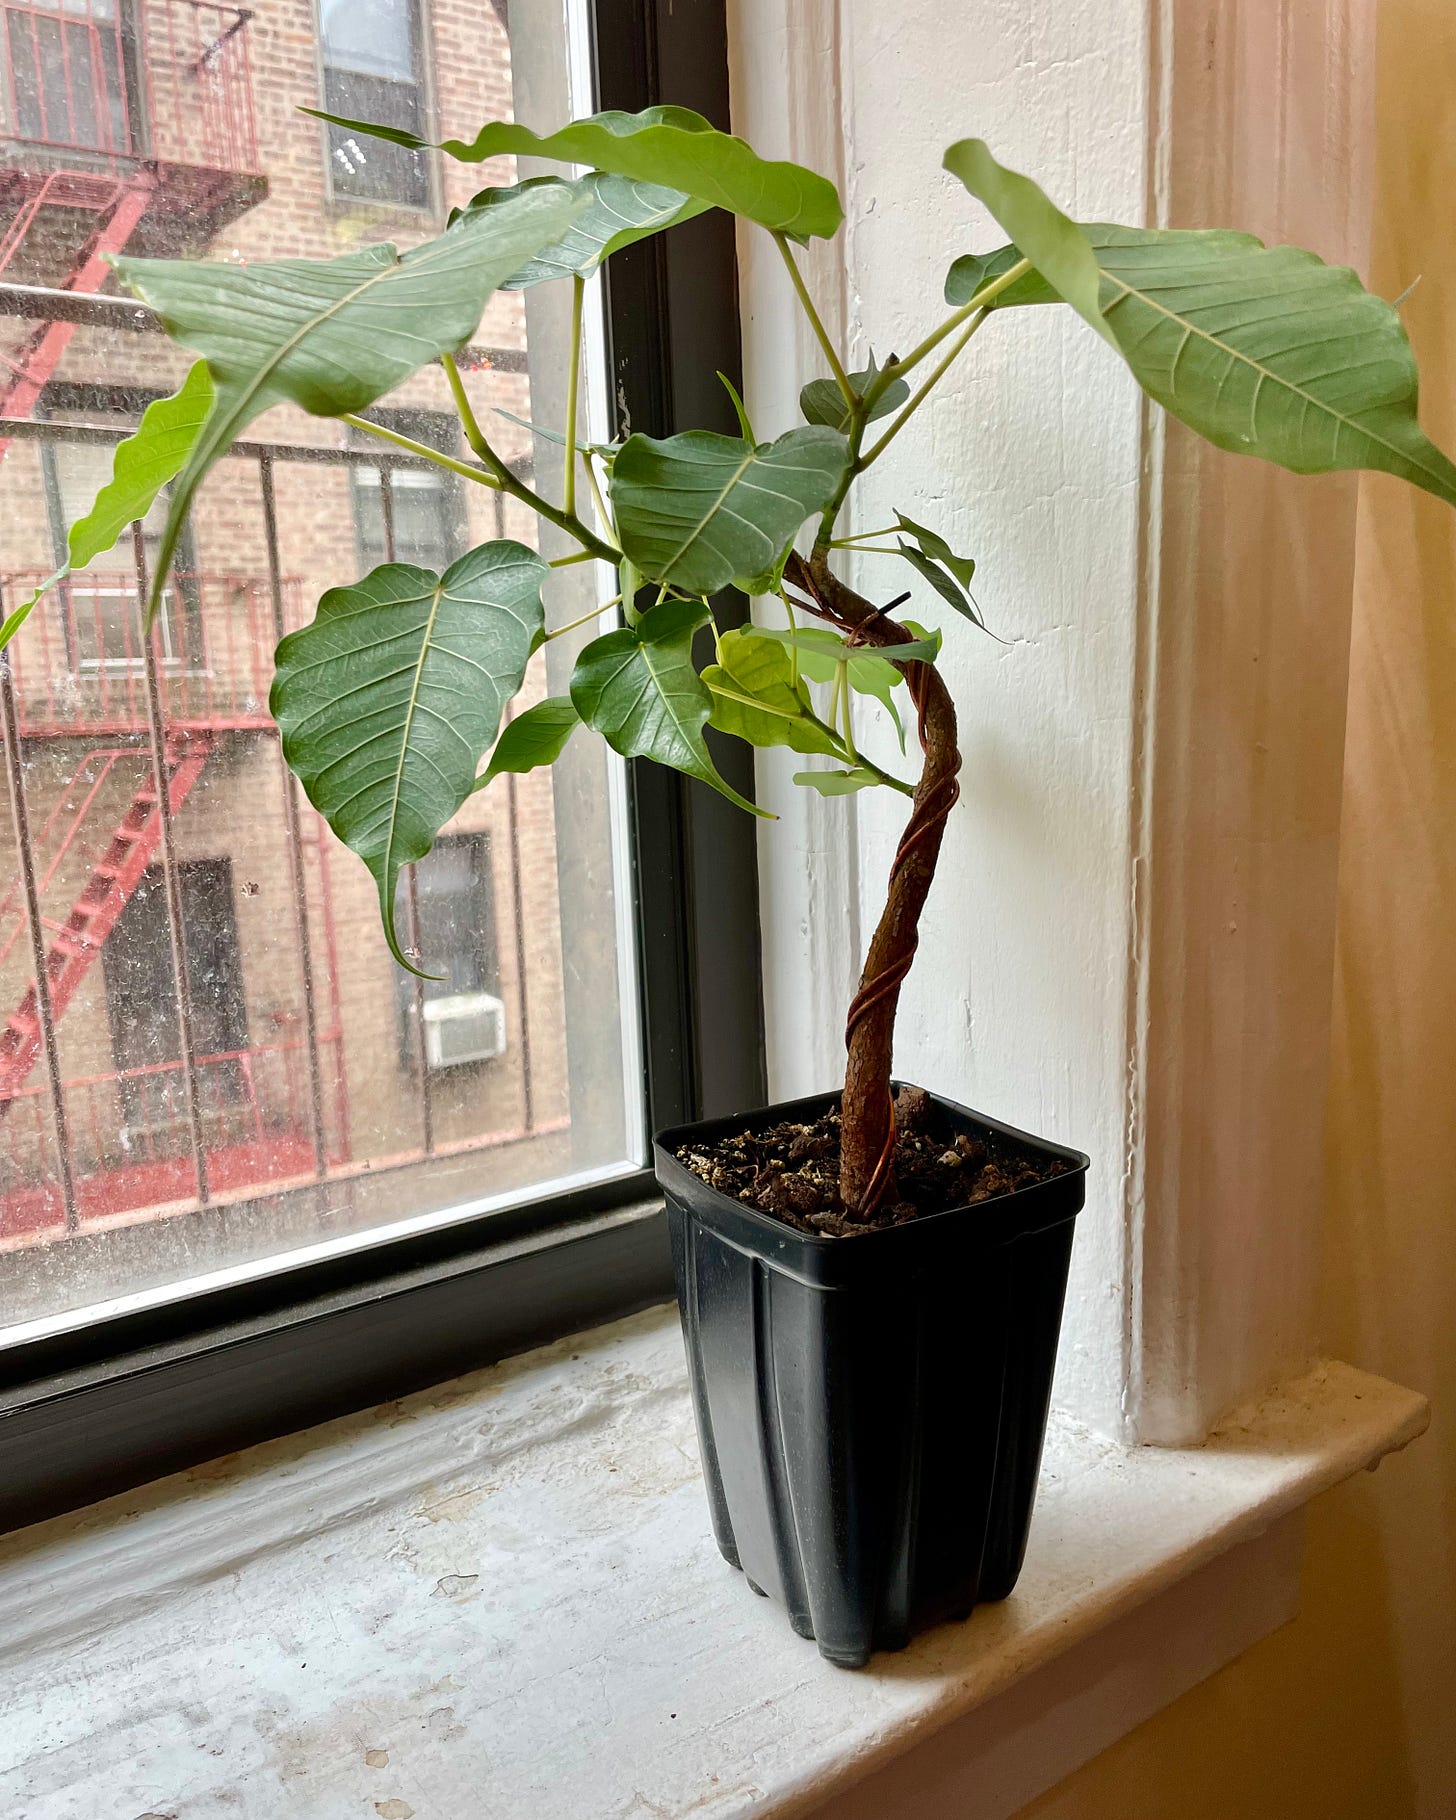 ID: The same ficus, hulked out with big new leaves